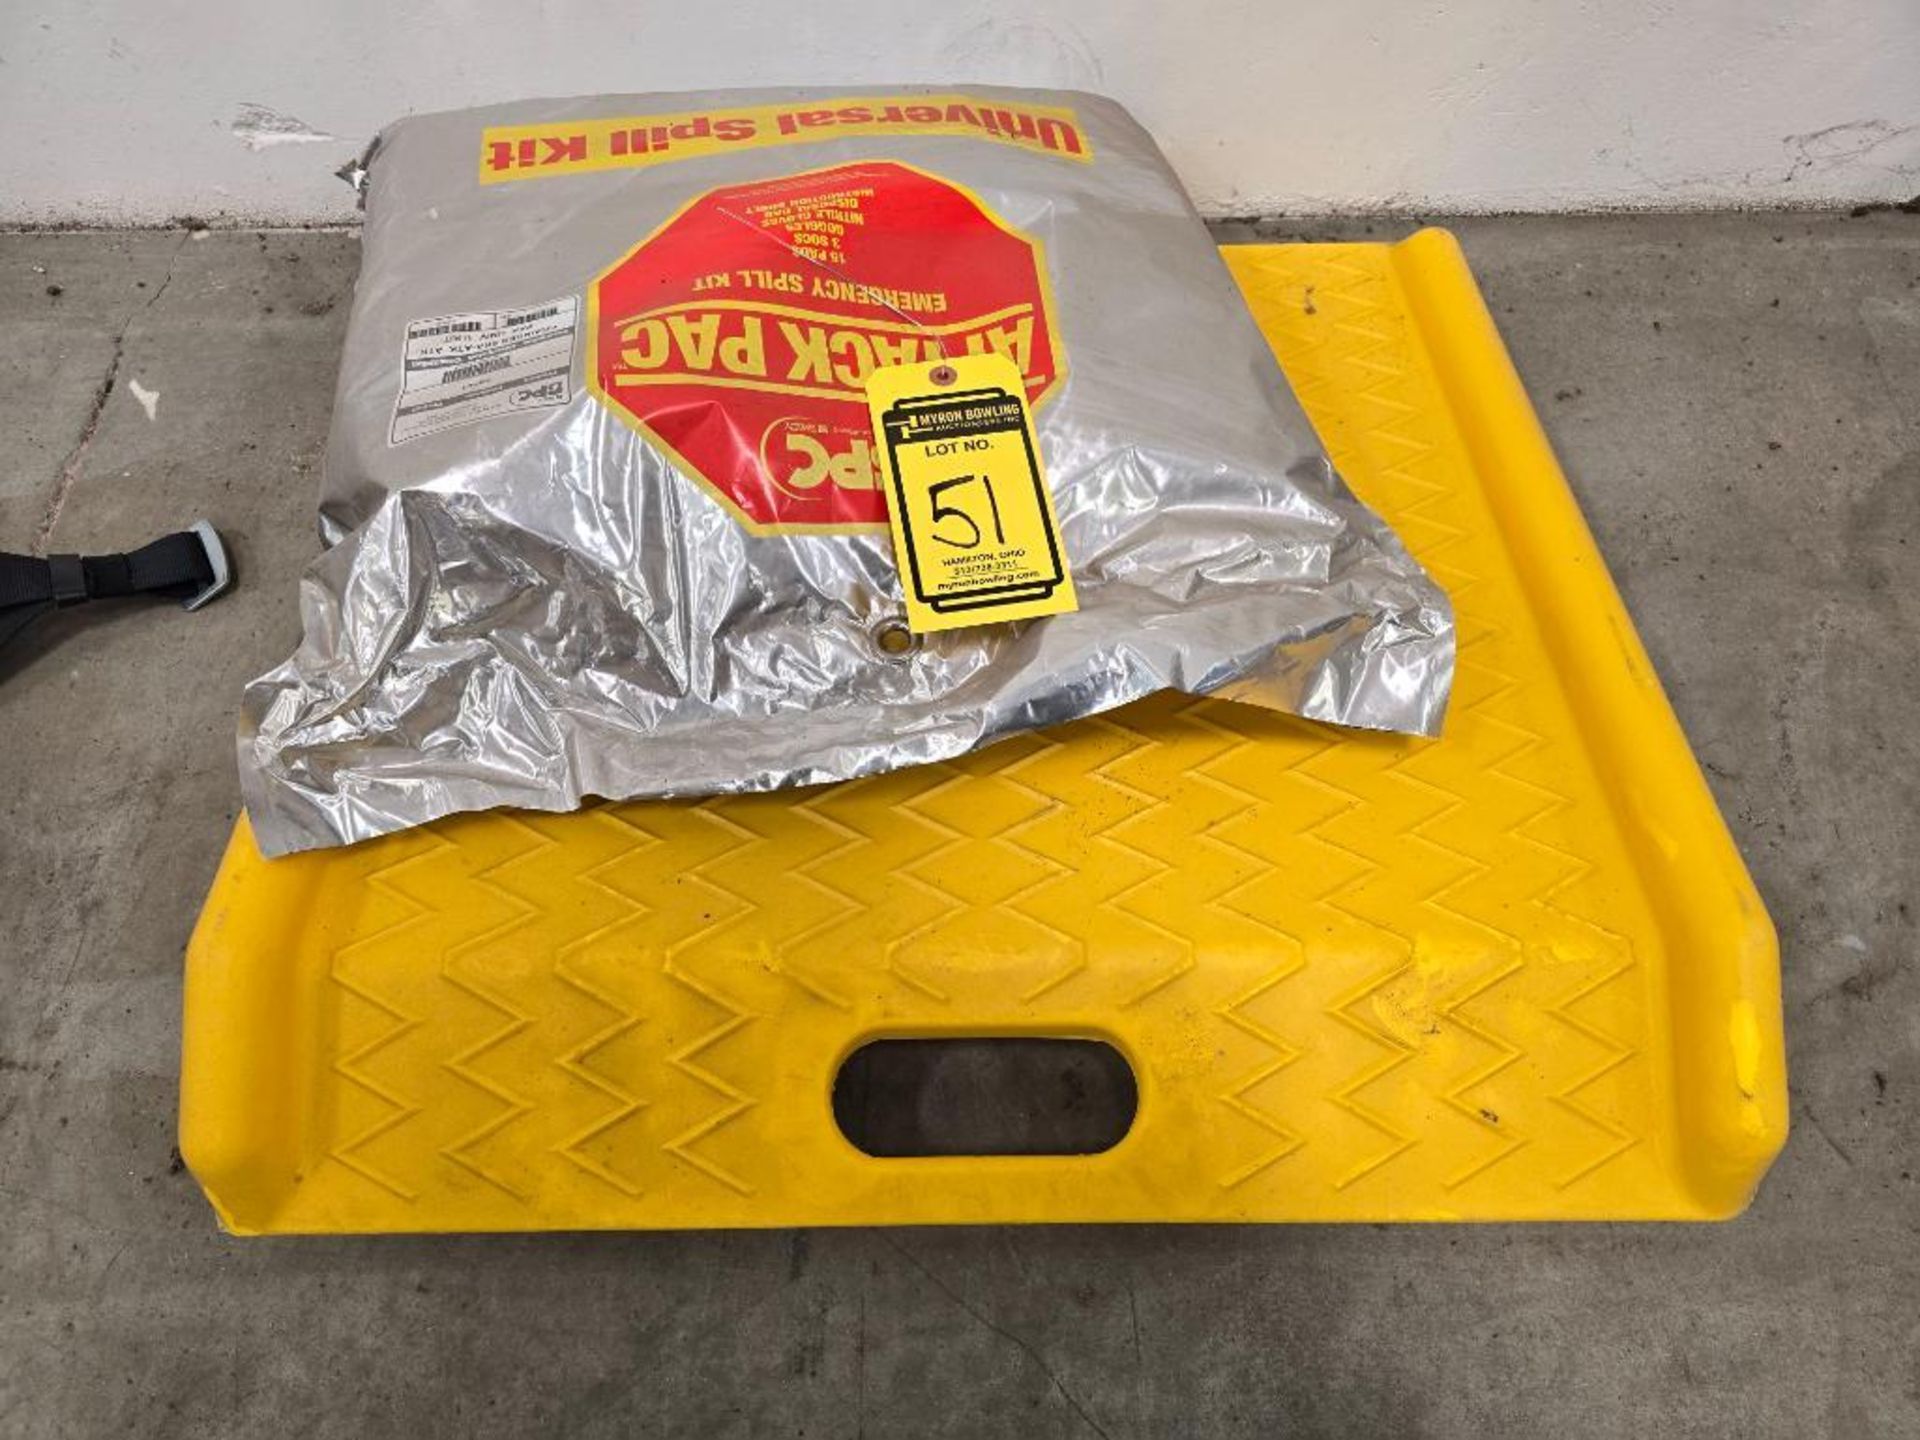 Spill-Kit & Plastic Ramp ($10 Loading Fee Will Be Added To Buyer's Invoice)